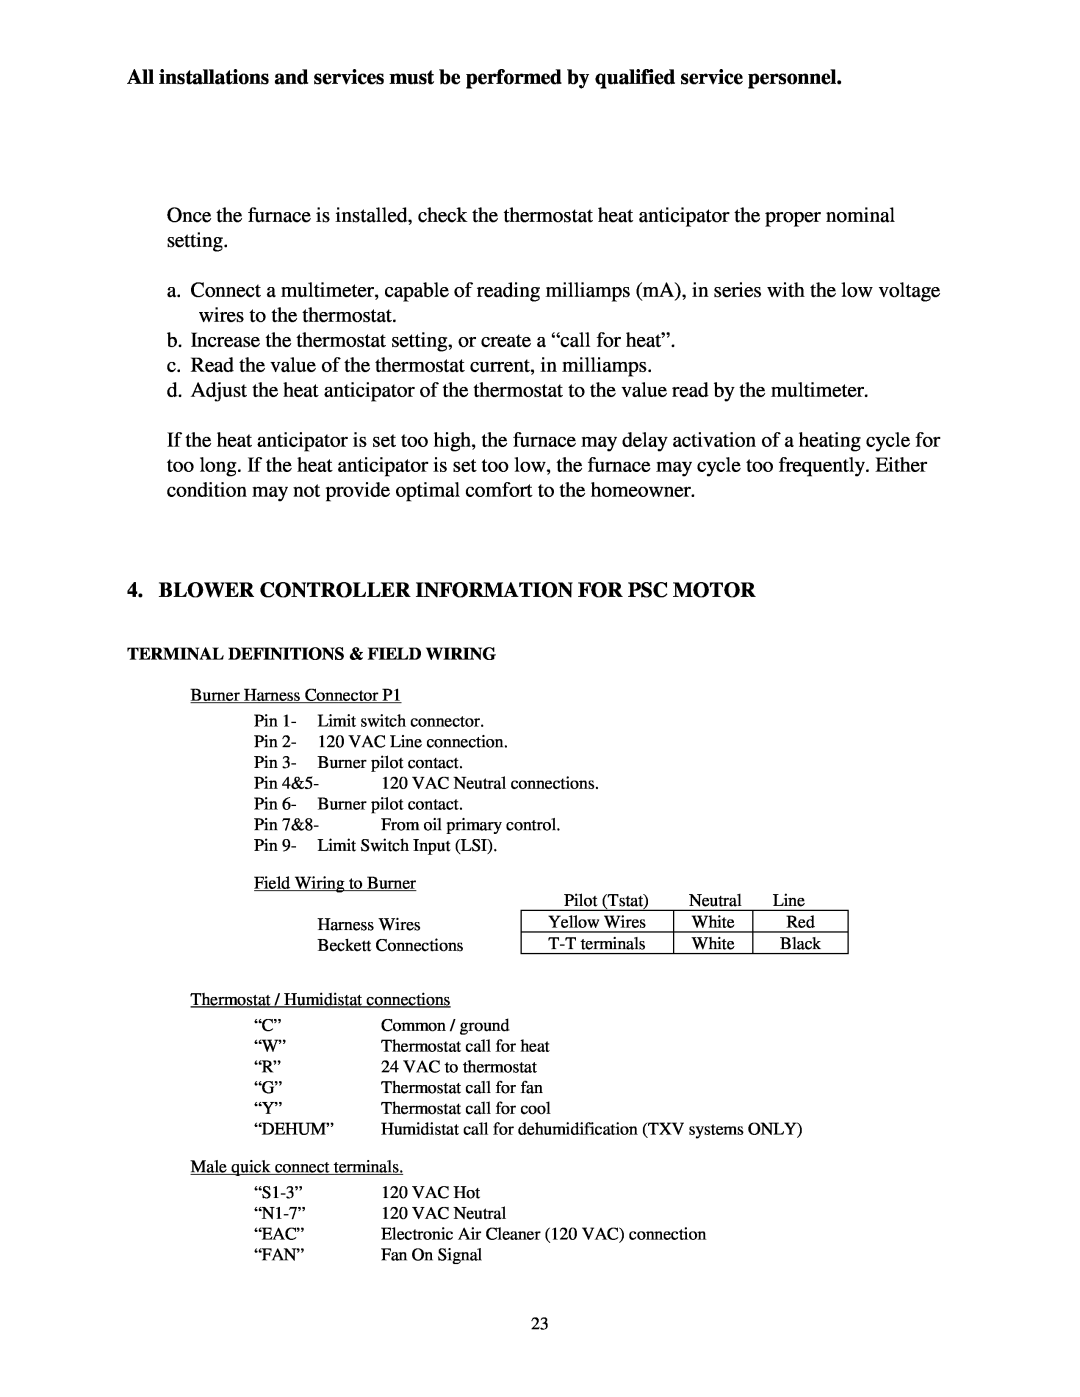 Thermo Products ome-72d36 service manual Blower Controller Information For Psc Motor, Terminal Definitions & Field Wiring 